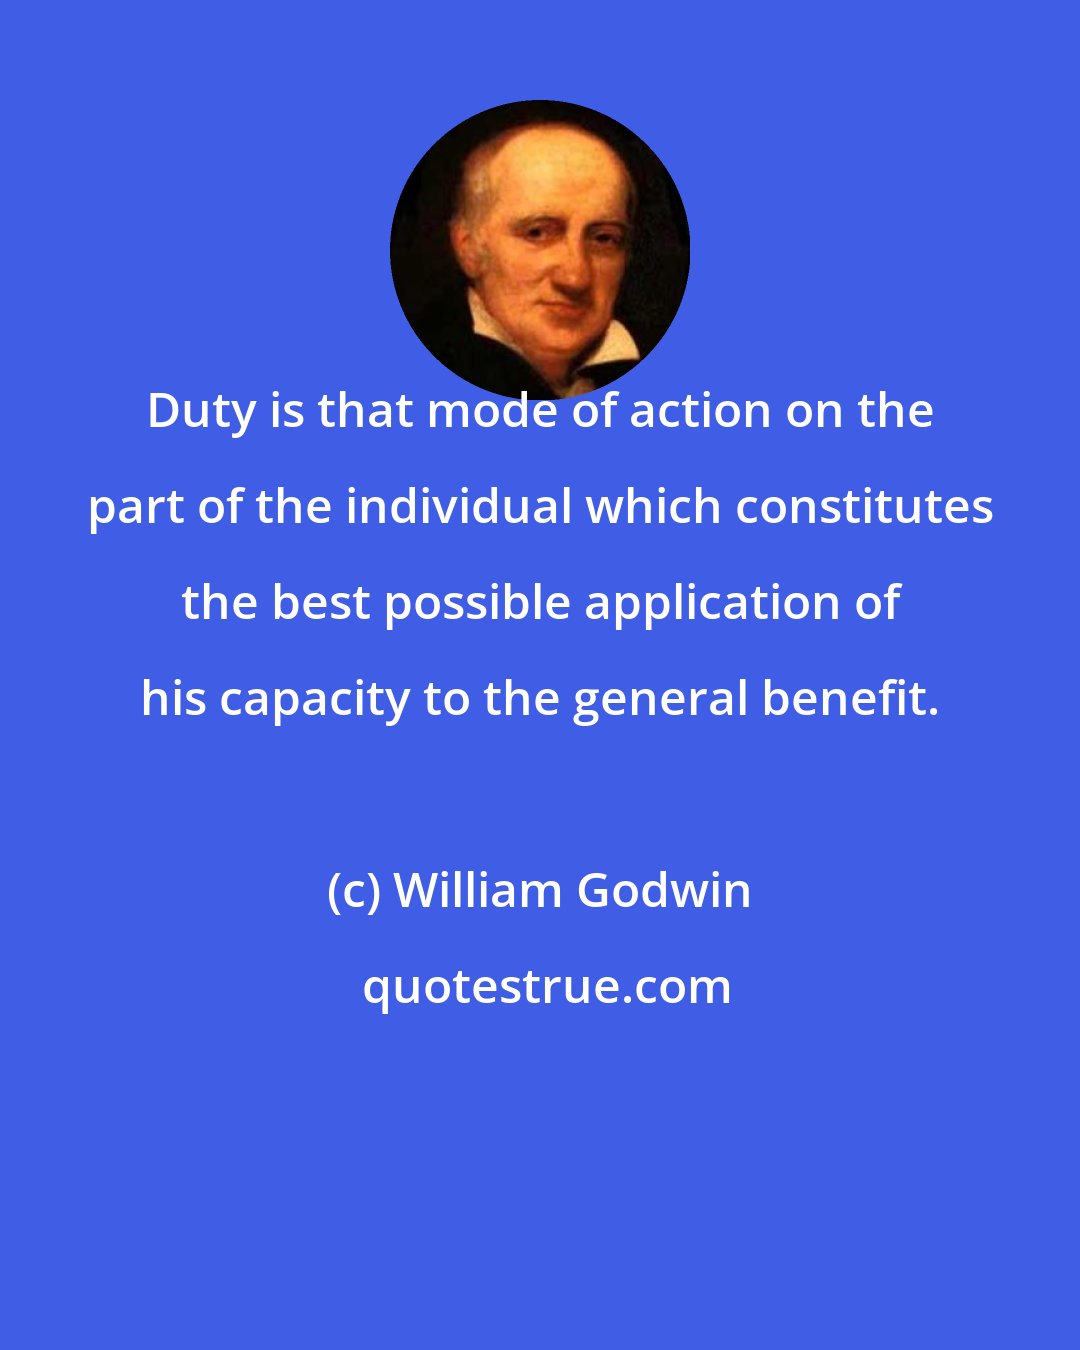 William Godwin: Duty is that mode of action on the part of the individual which constitutes the best possible application of his capacity to the general benefit.